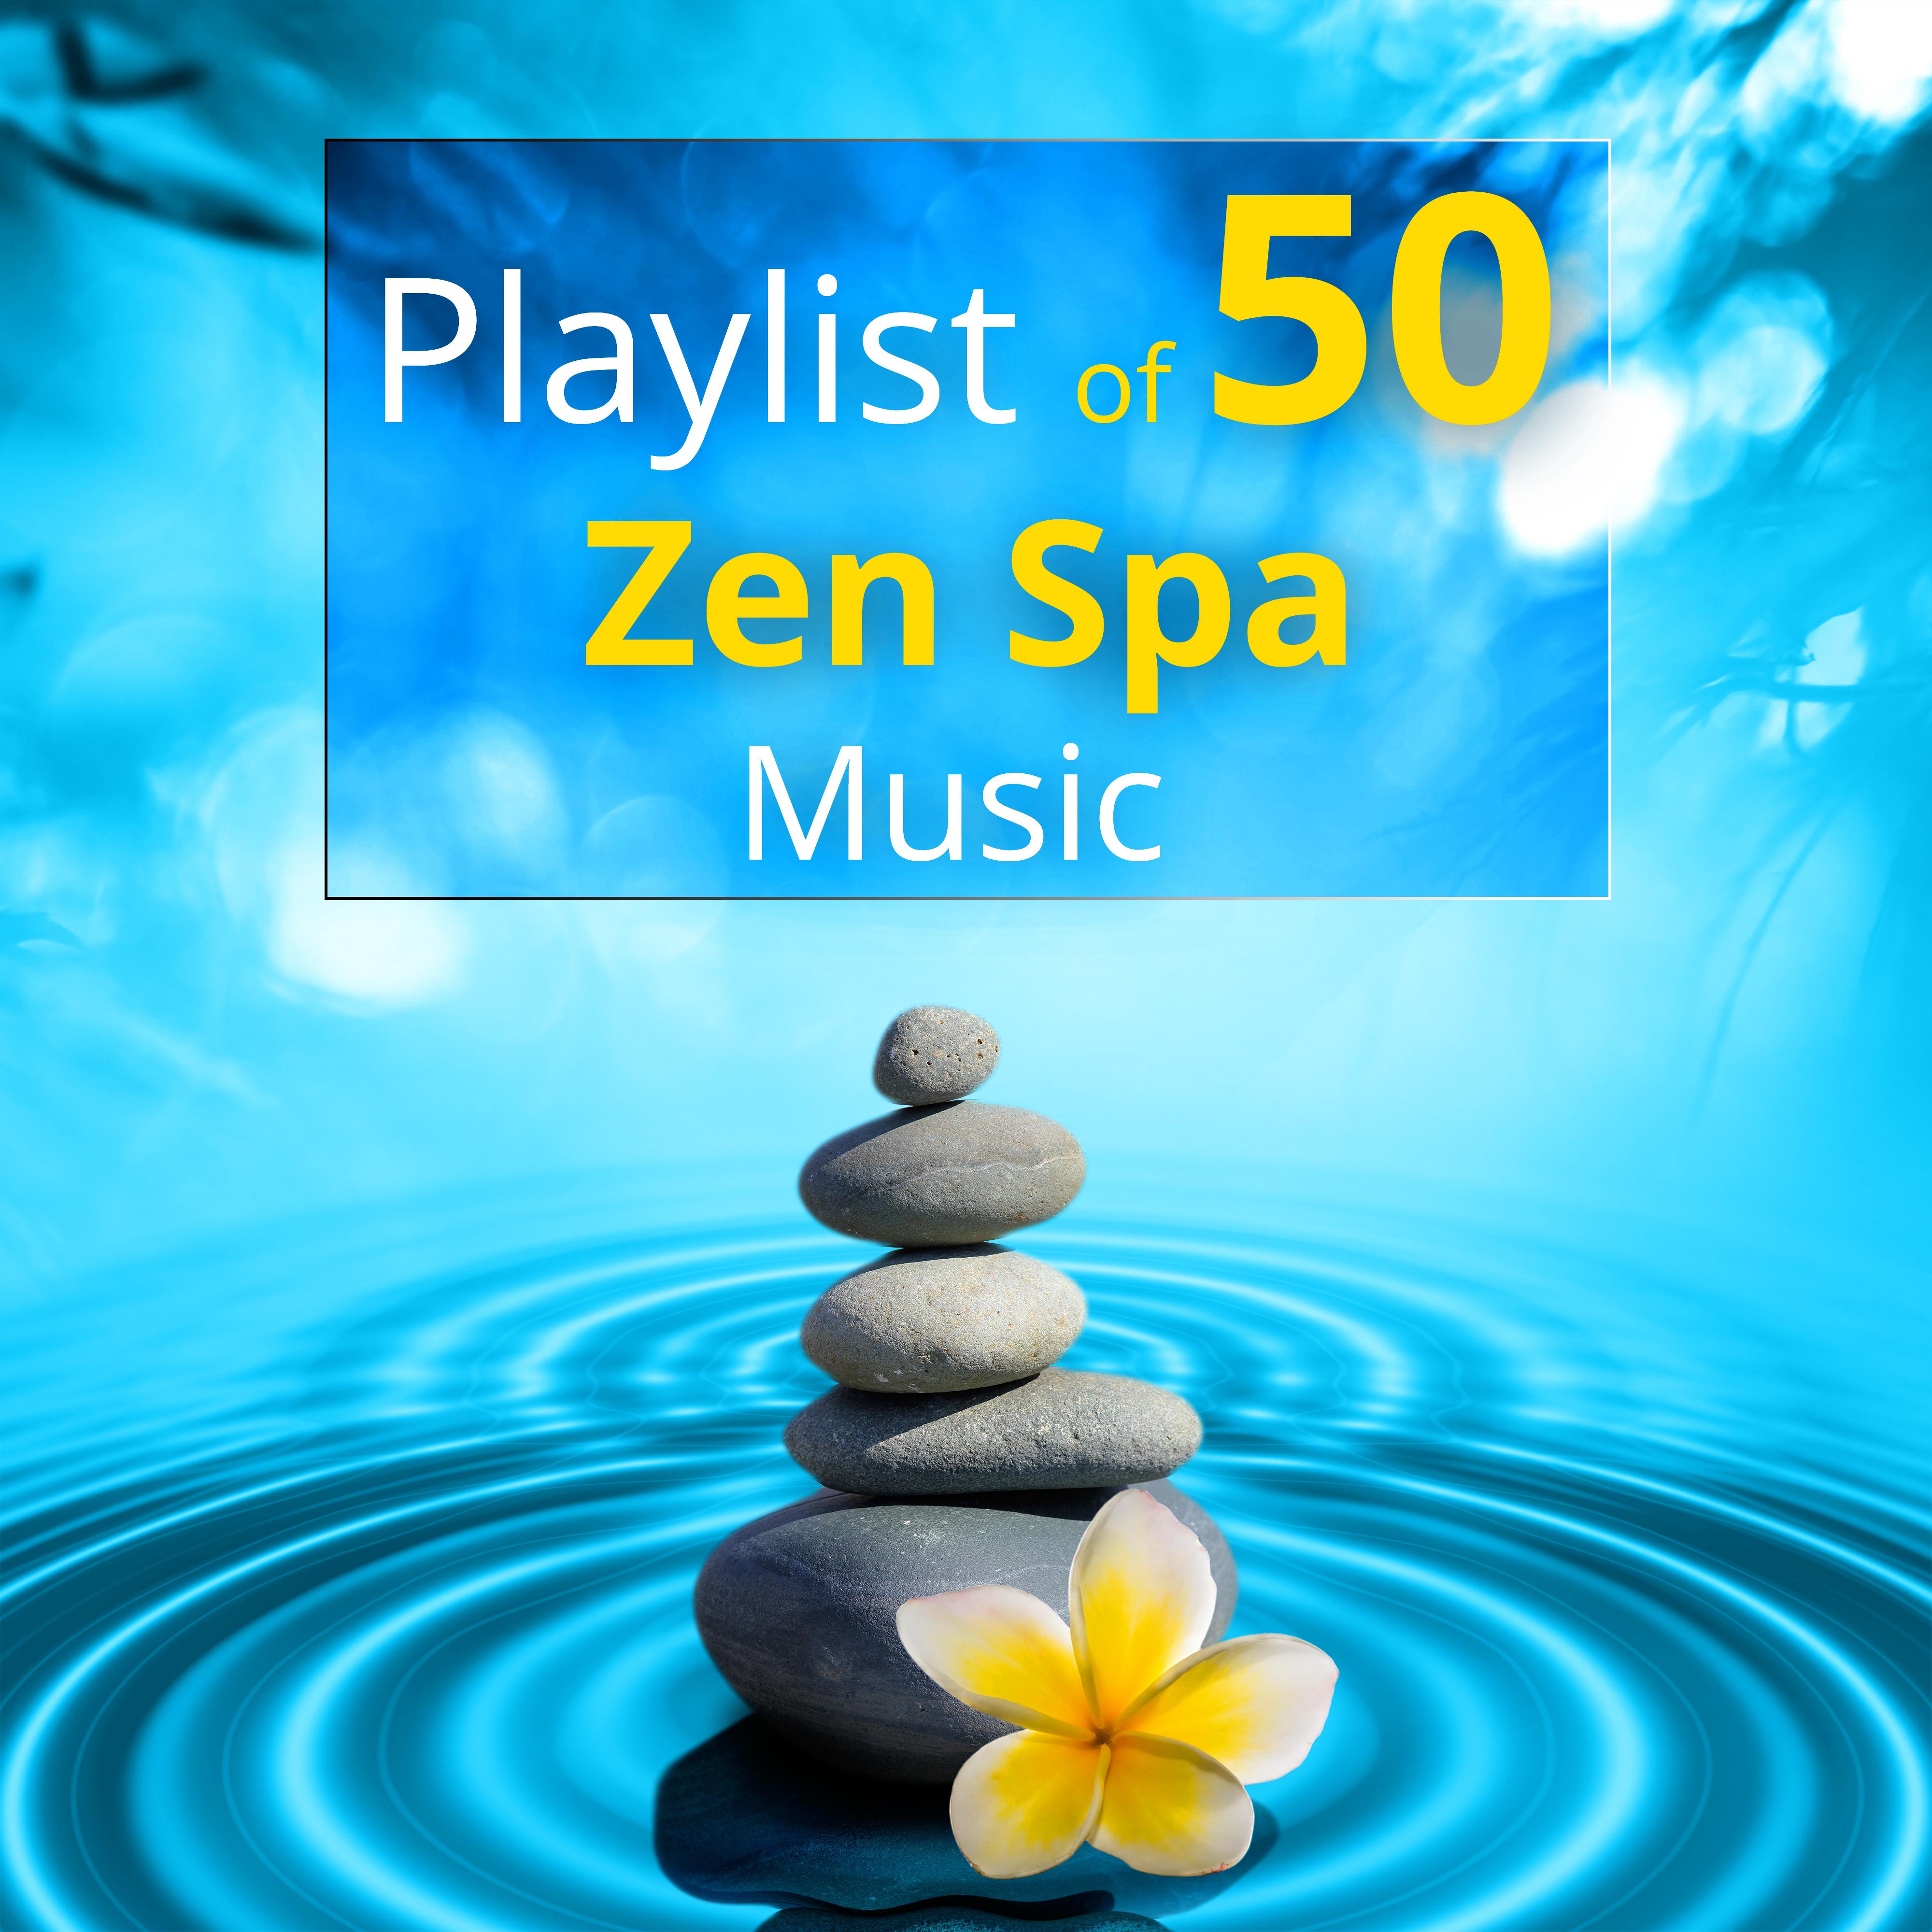 Playlist of 50 Zen Spa Music - Relaxing Sounds of Nature for Healing Massage & Wellness Music, and Reiki